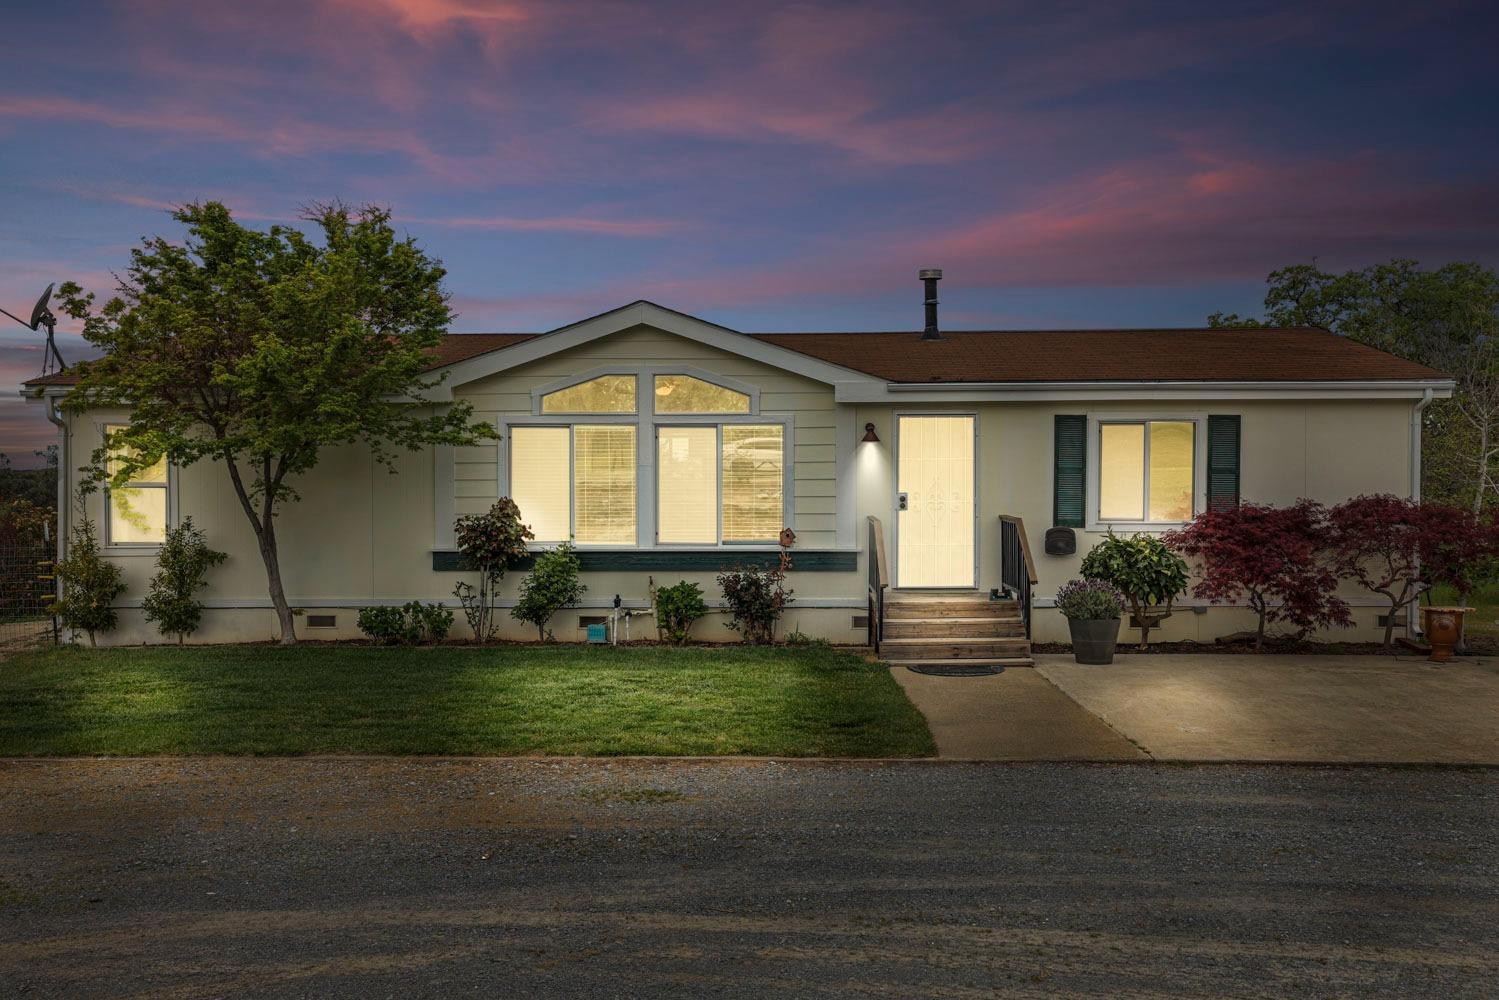 Photo of 2060 Taurus Dr in Cool, CA